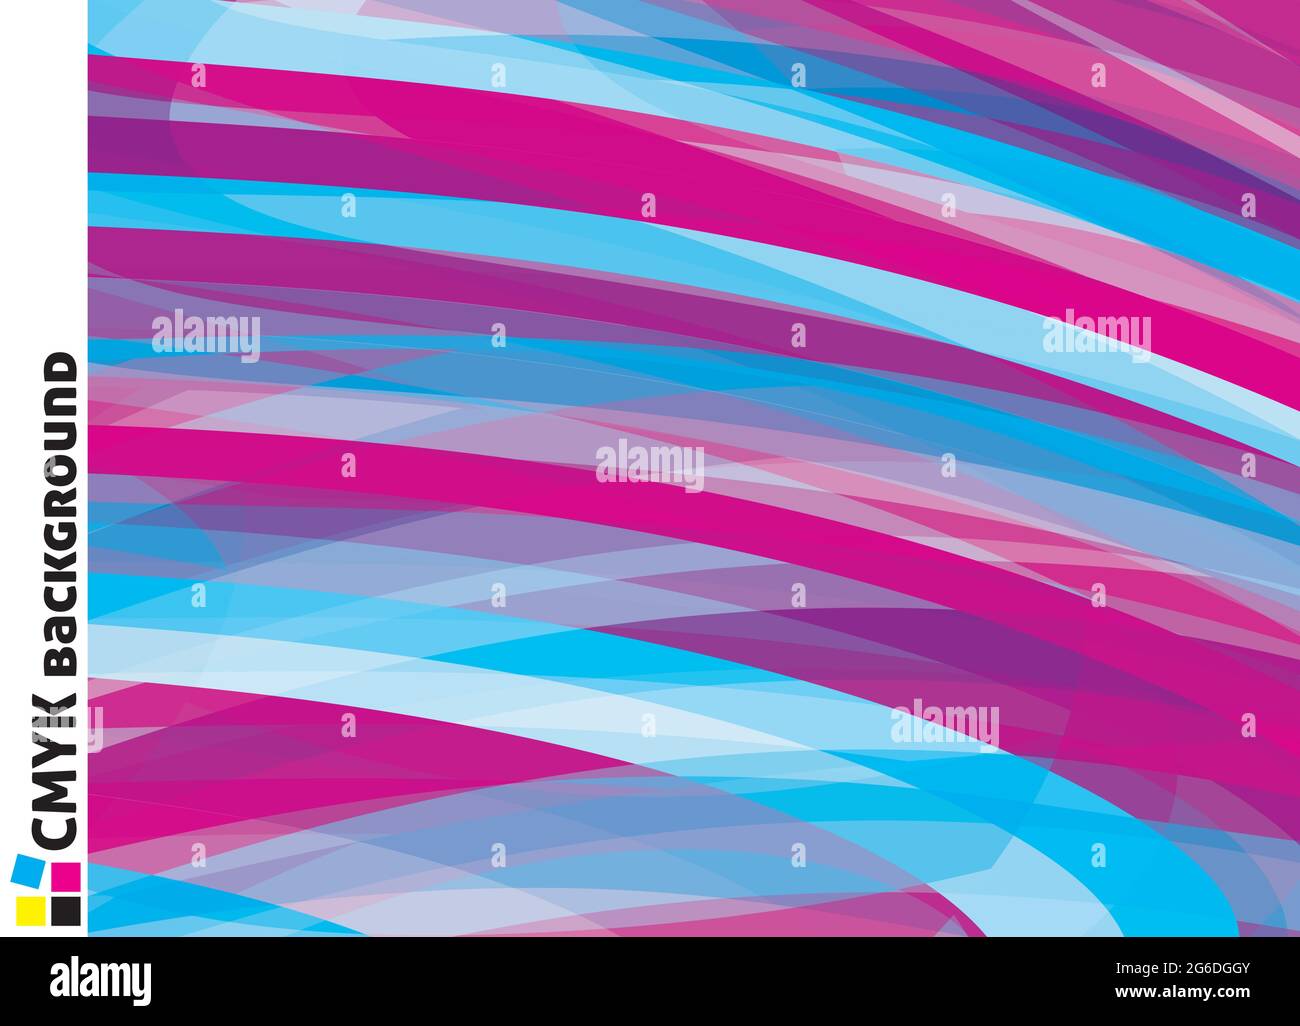 Abstract background with red violet and cerulean chaotic stripes. Artistic vector graphic pattern. CMYK colors Stock Vector